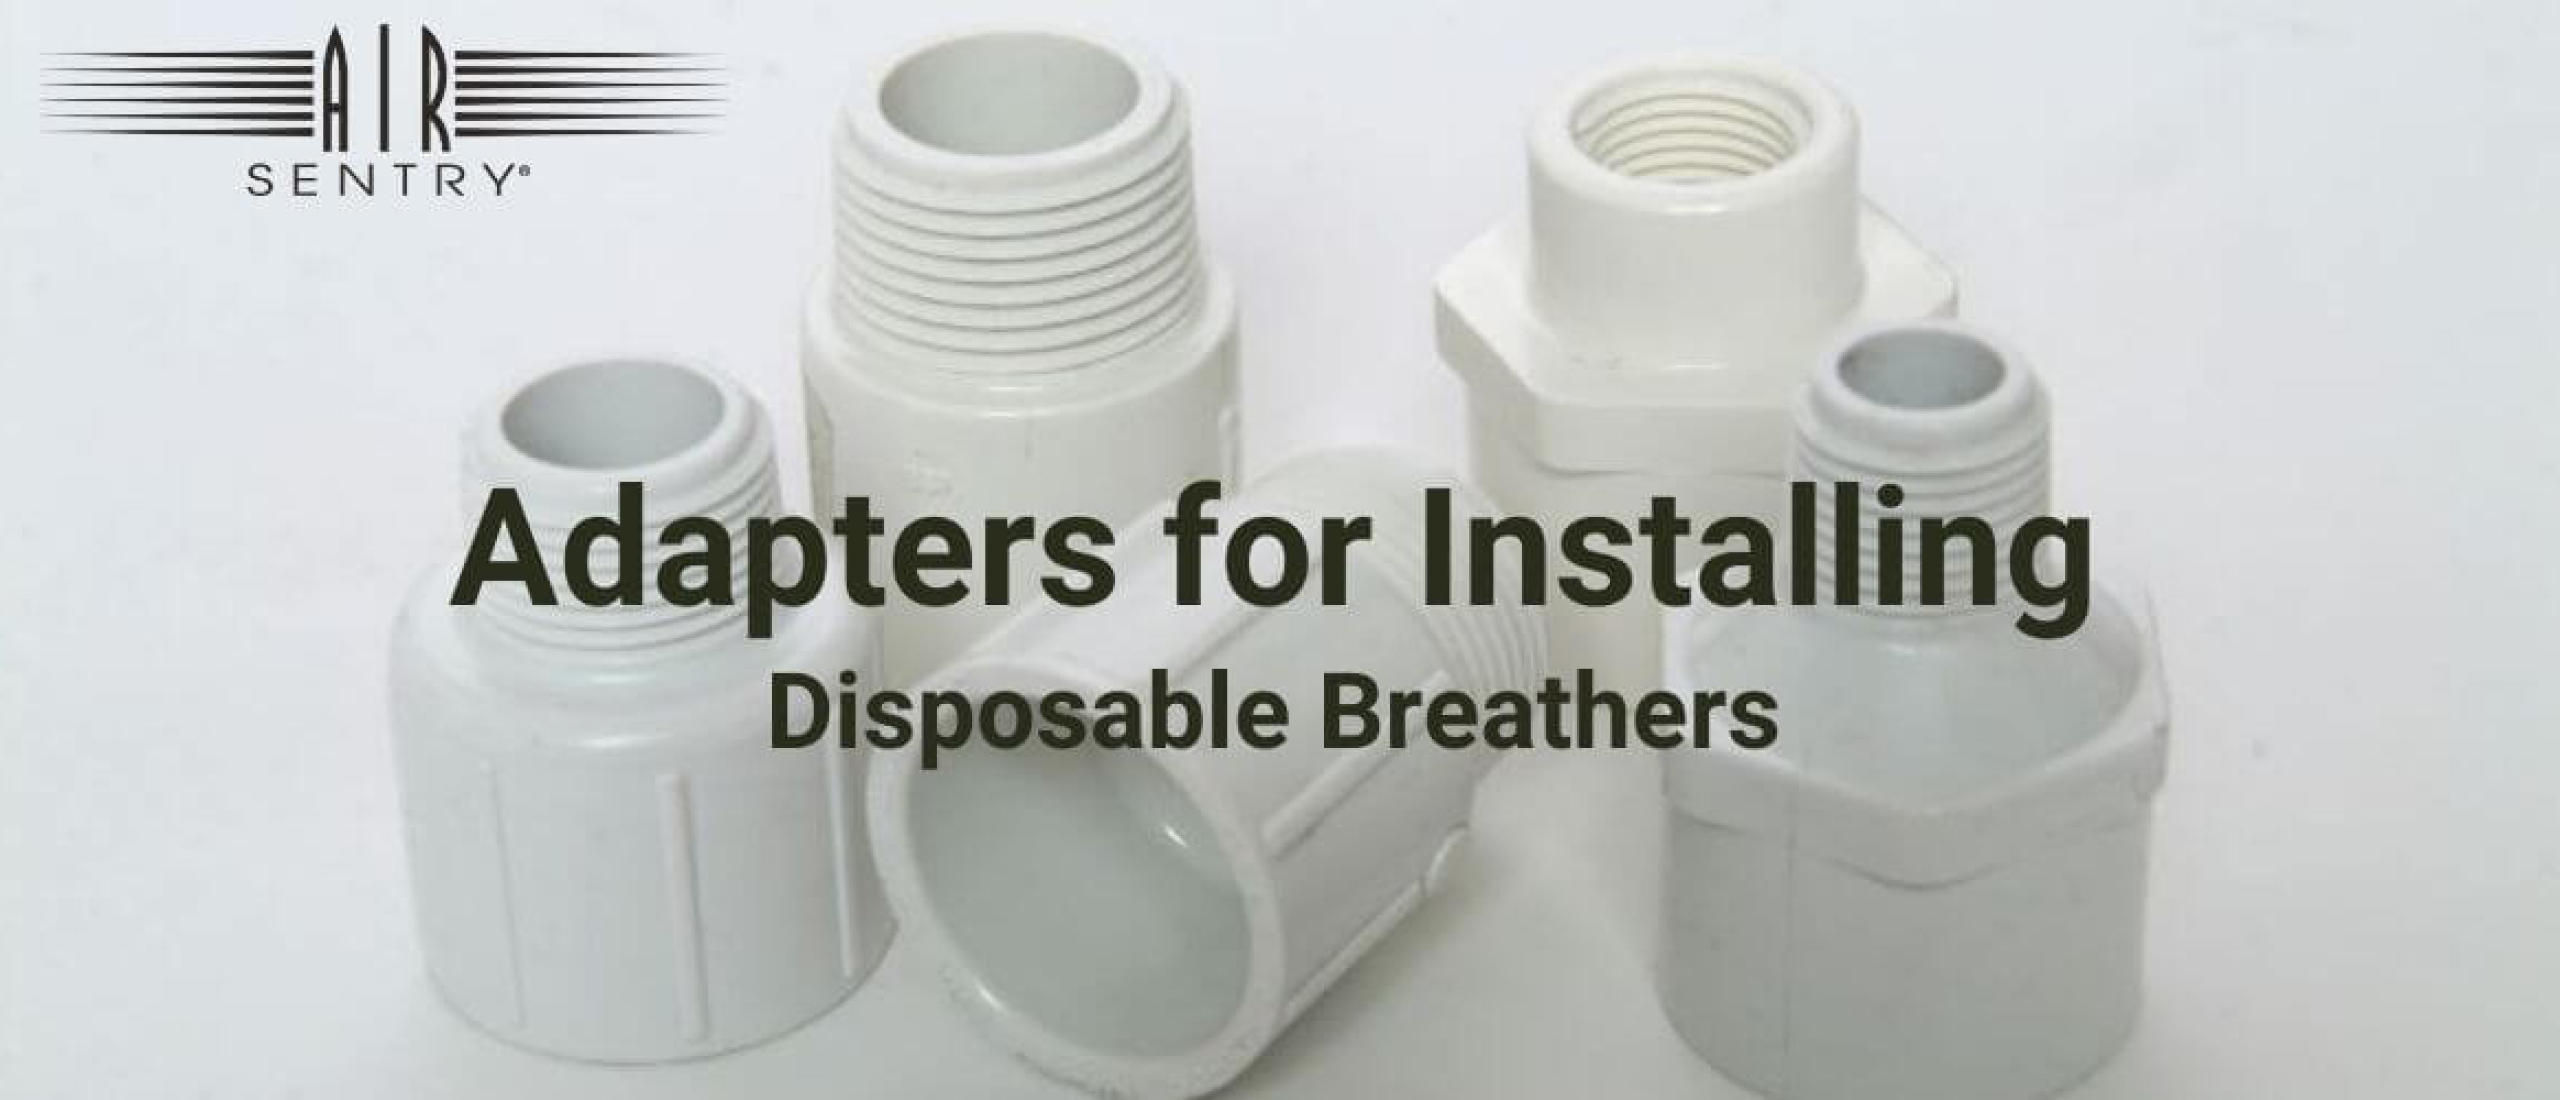 Installation Procedure of Air Sentry disposable Breathers